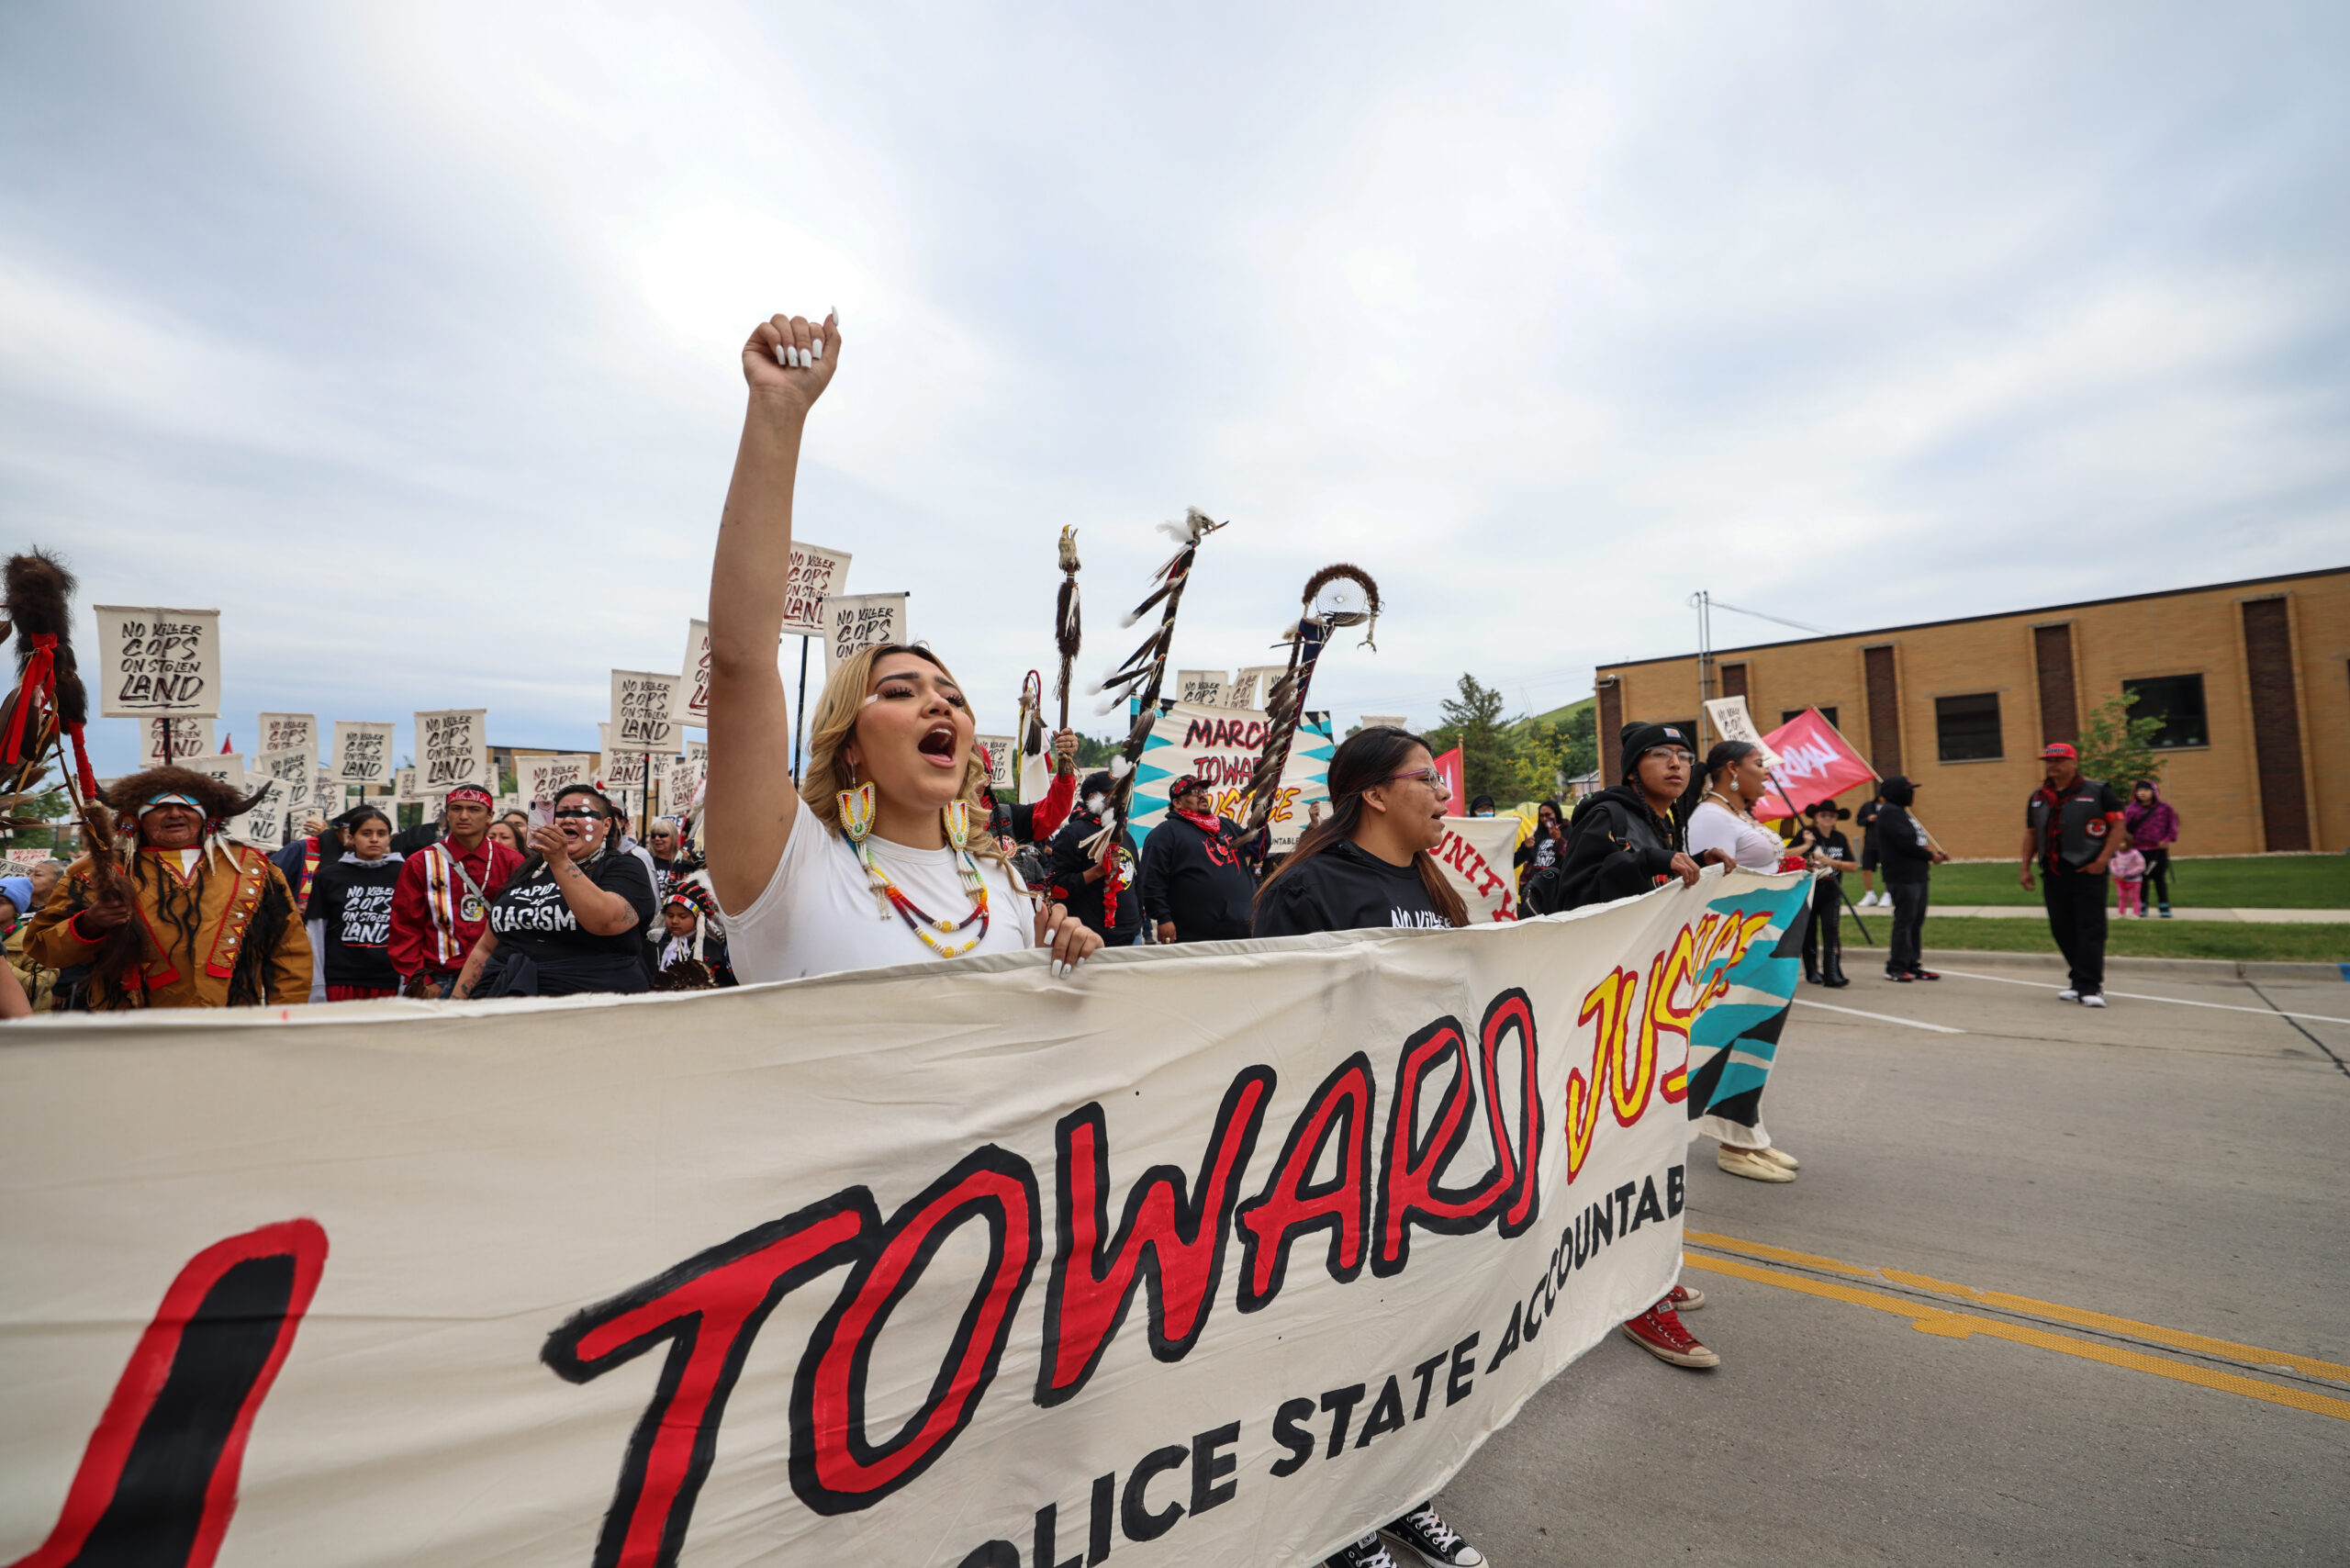 Why We March Toward Justice: 11 Police Killings in 2 Years in Rapid City, Majority Indigenous Victims